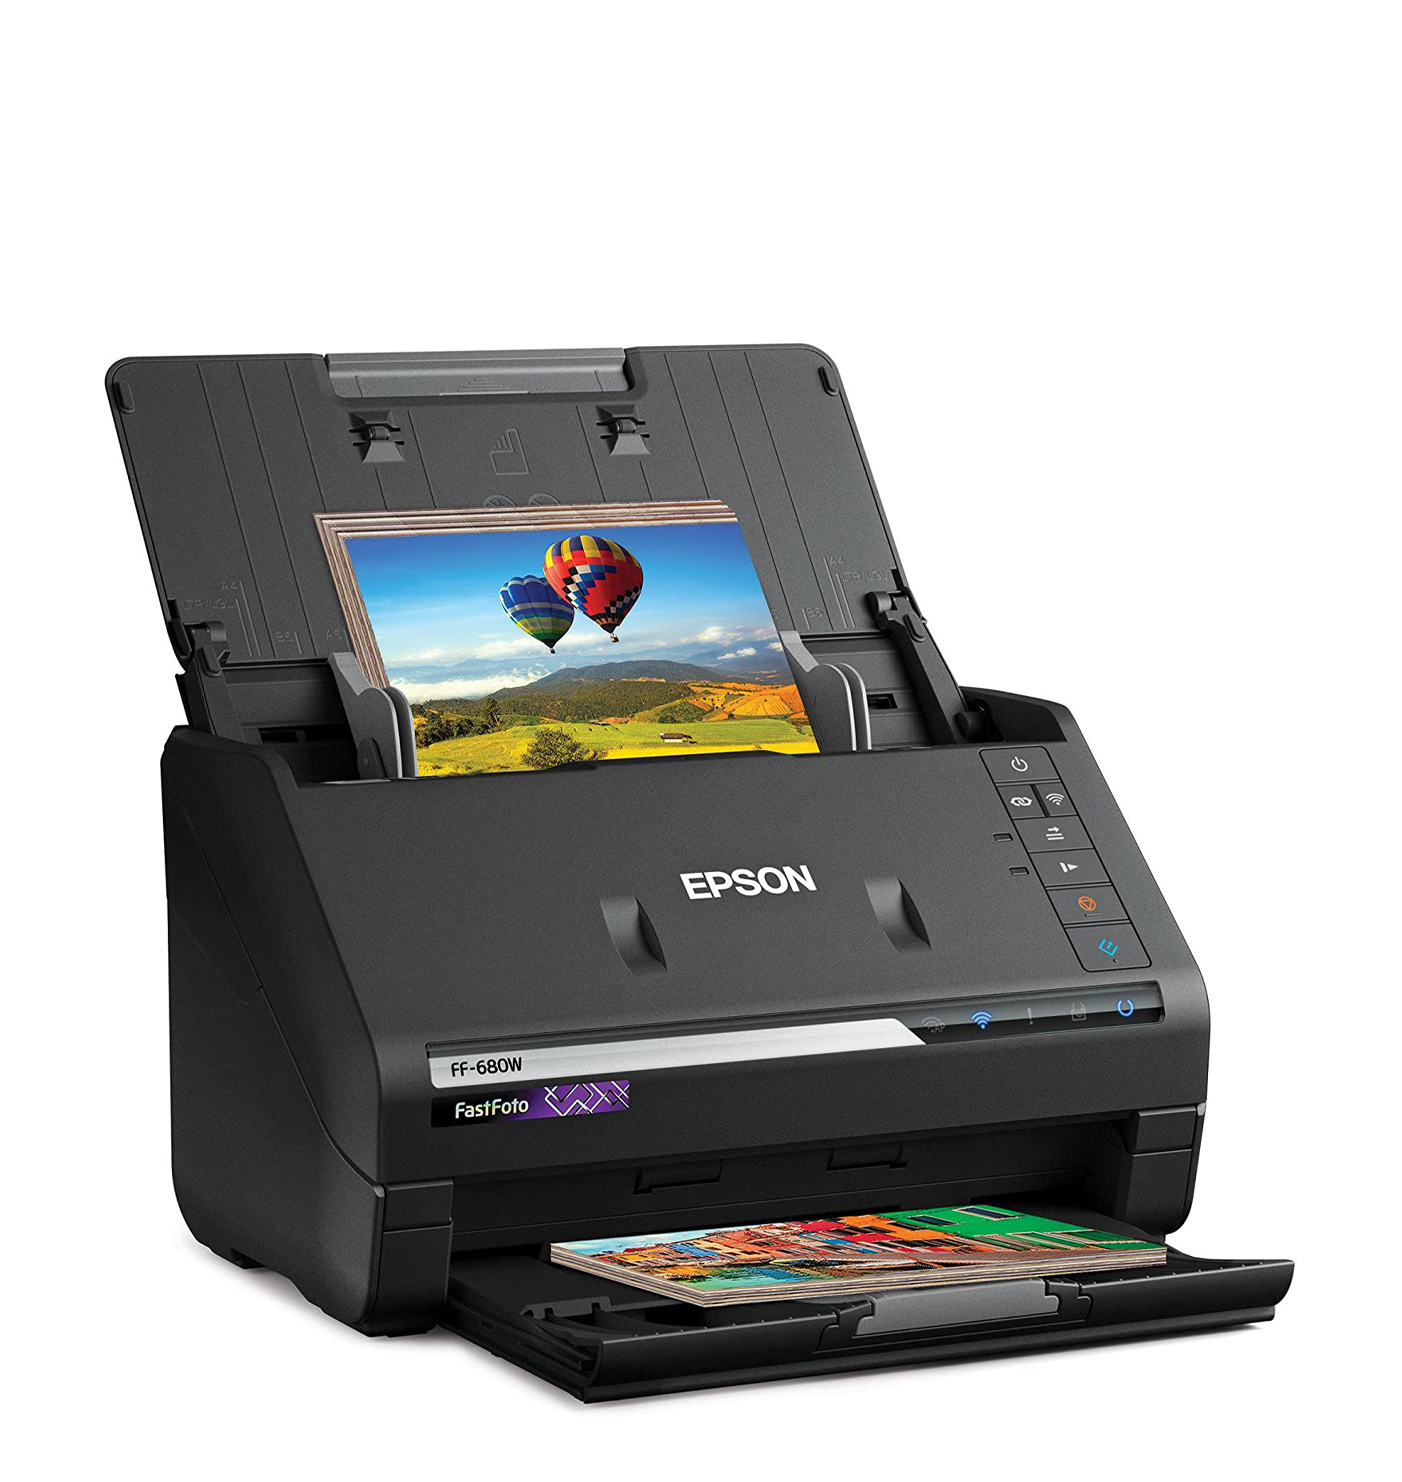 FastFoto FF-680W Wireless Photo and Document Scanning System